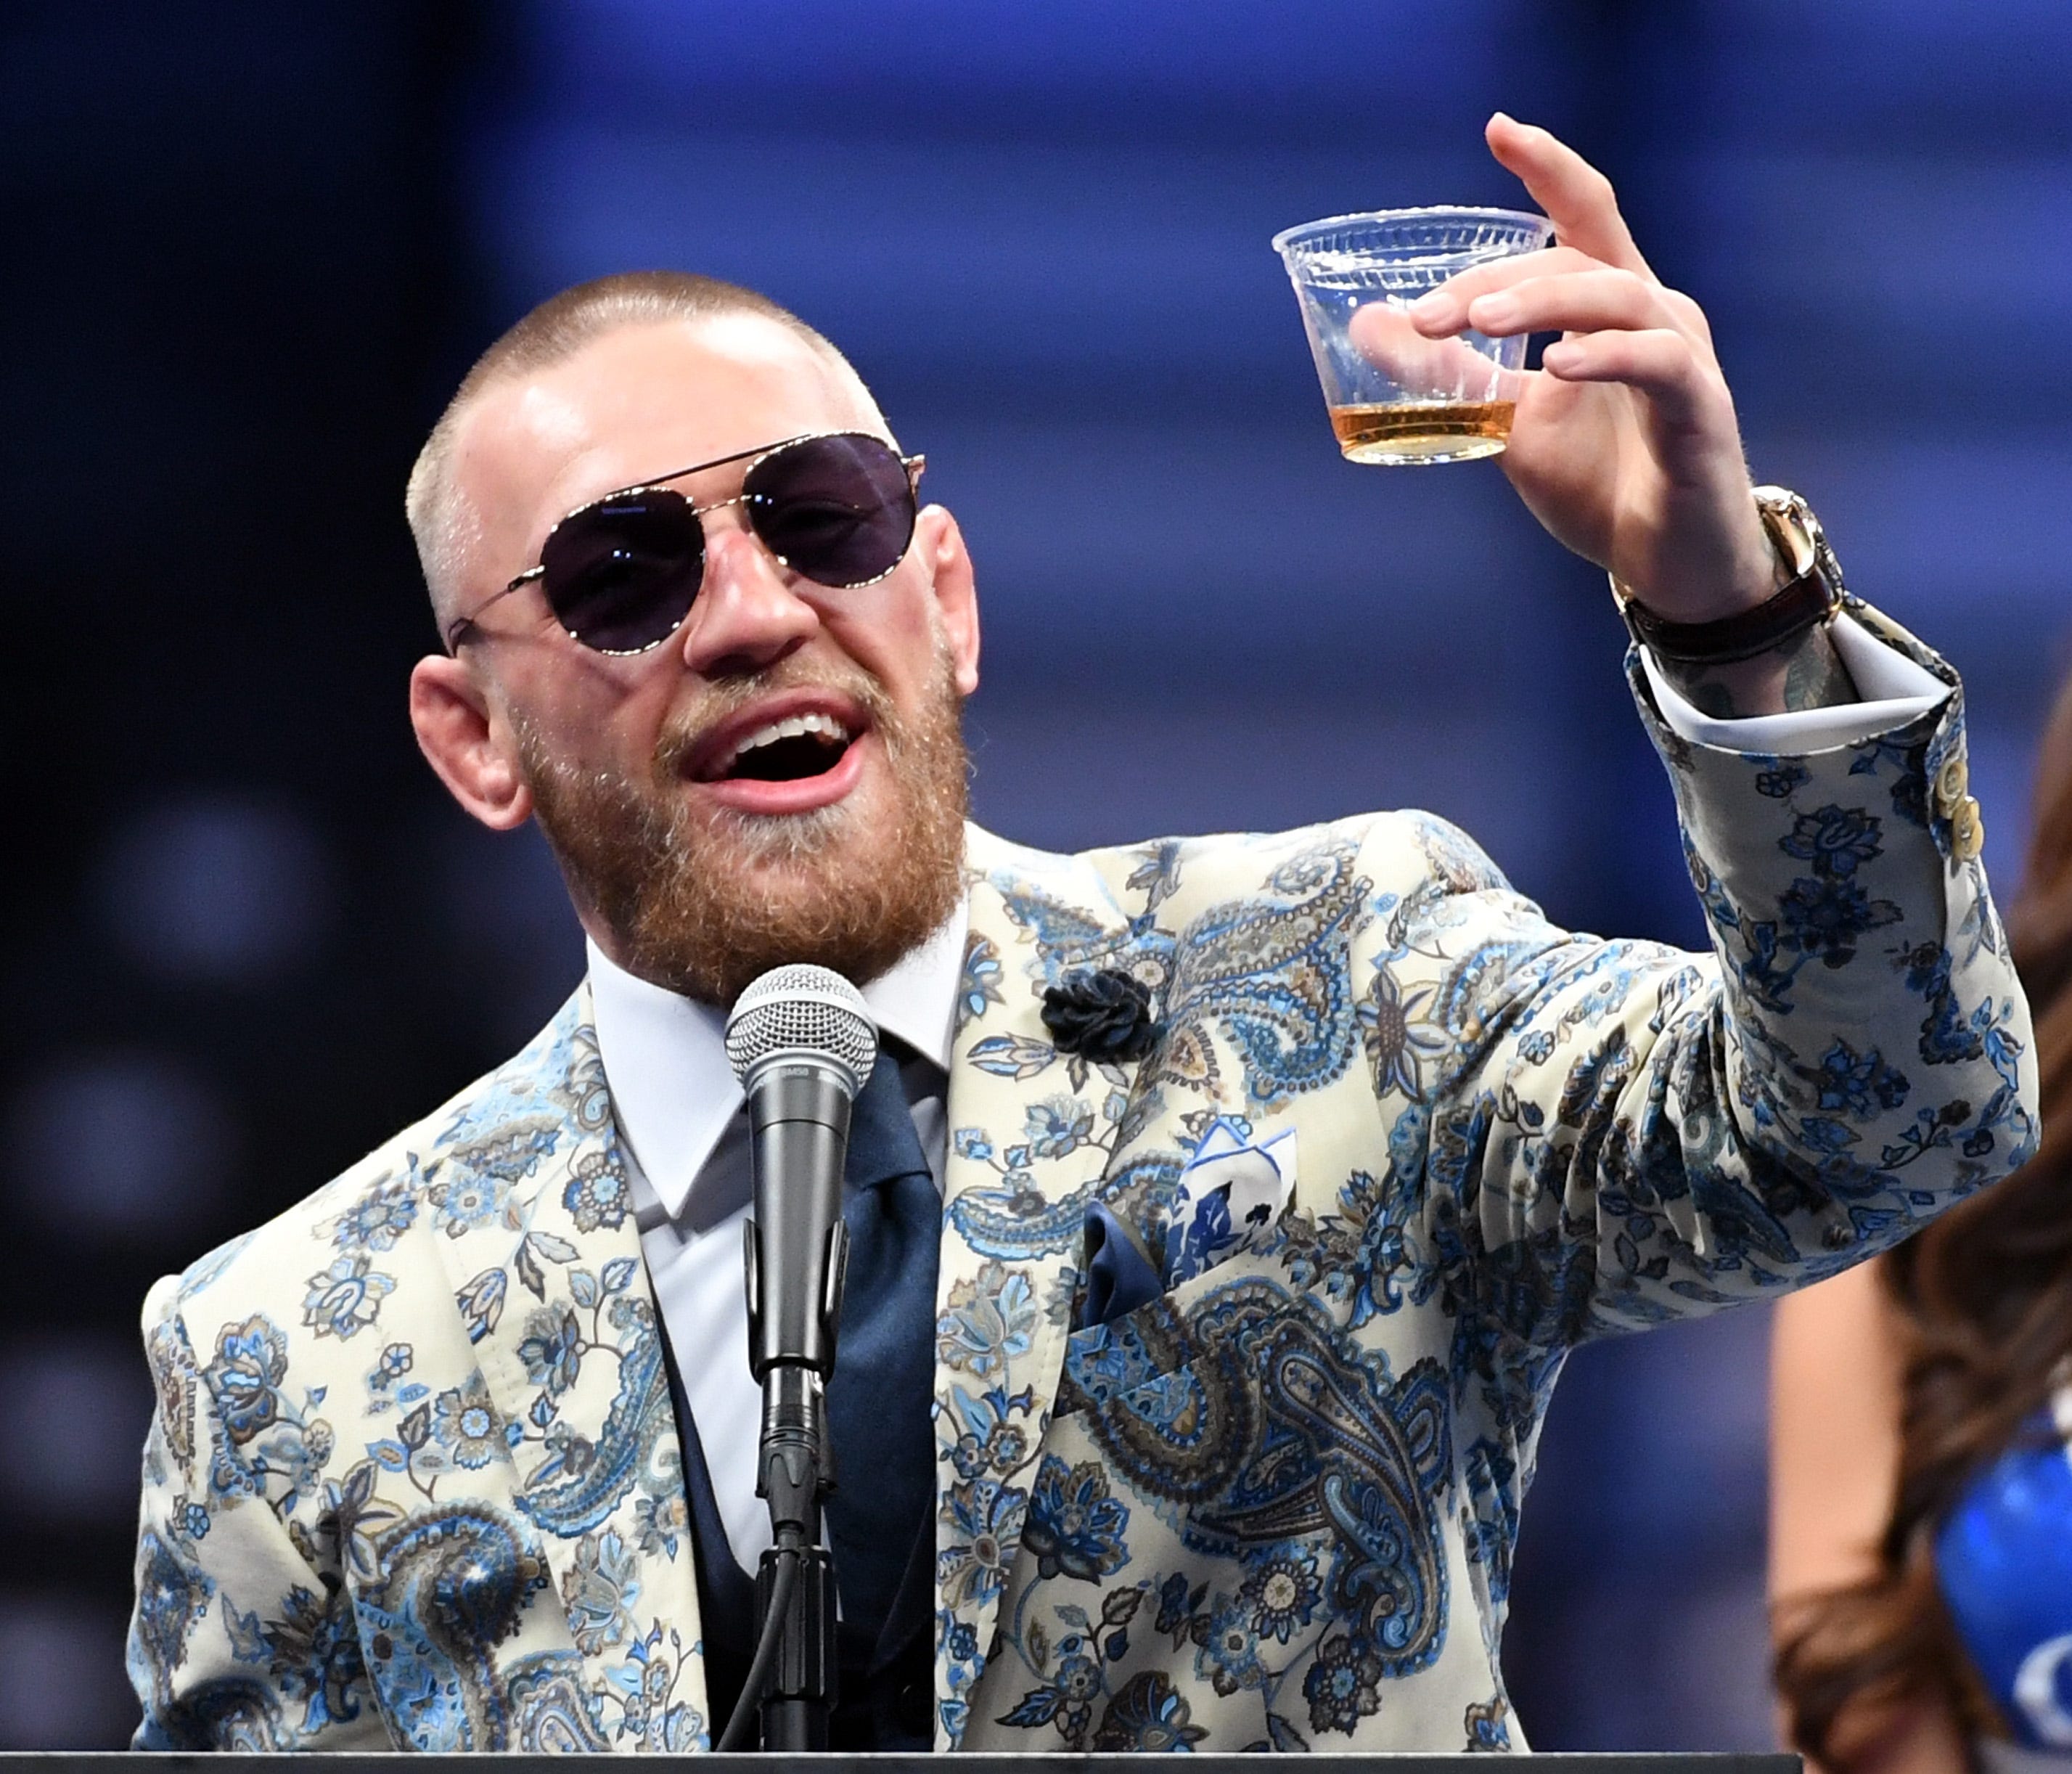 LAS VEGAS, NV - AUGUST 26:  Conor McGregor holds up a drink as he speaks during a news conference after his 10th-round TKO loss to Floyd Mayweather Jr. in their super welterweight boxing match at T-Mobile Arena on August 26, 2017 in Las Vegas, Nevada